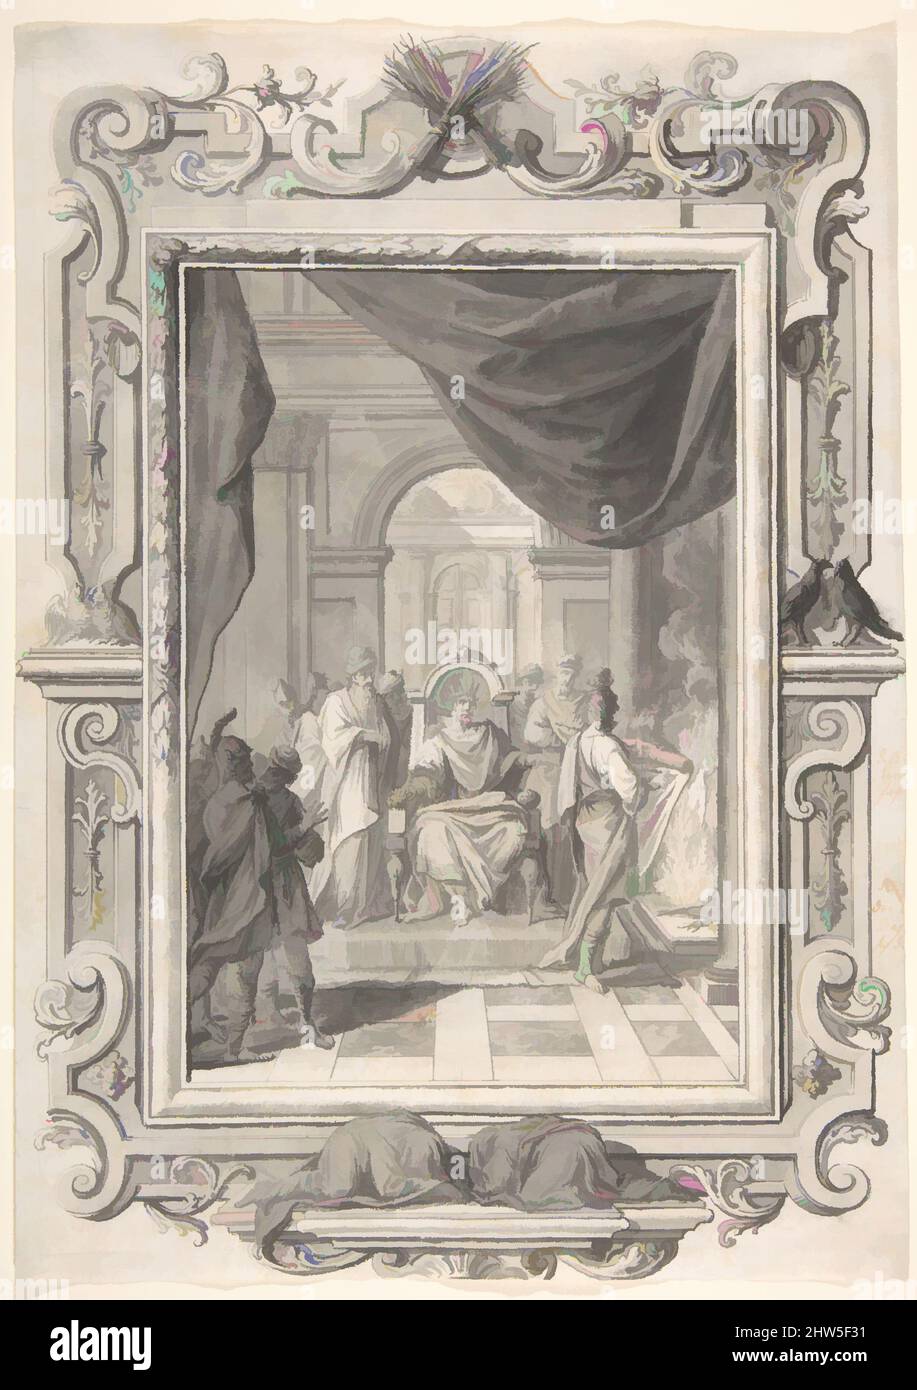 Art inspired by A Scene of Judgment, ca. 1730, Pen and black ink, touches of brown ink, and gray wash, 10 13/16 x 15 13/16 in. (27.4 x 40.2 cm), Drawings, Johann Melchior Füssli (Swiss, Zurich 1677–1736 Zurich), Johann Daniel Preissler (German, Nuremberg 1666–1737 Nuremberg, Classic works modernized by Artotop with a splash of modernity. Shapes, color and value, eye-catching visual impact on art. Emotions through freedom of artworks in a contemporary way. A timeless message pursuing a wildly creative new direction. Artists turning to the digital medium and creating the Artotop NFT Stock Photo